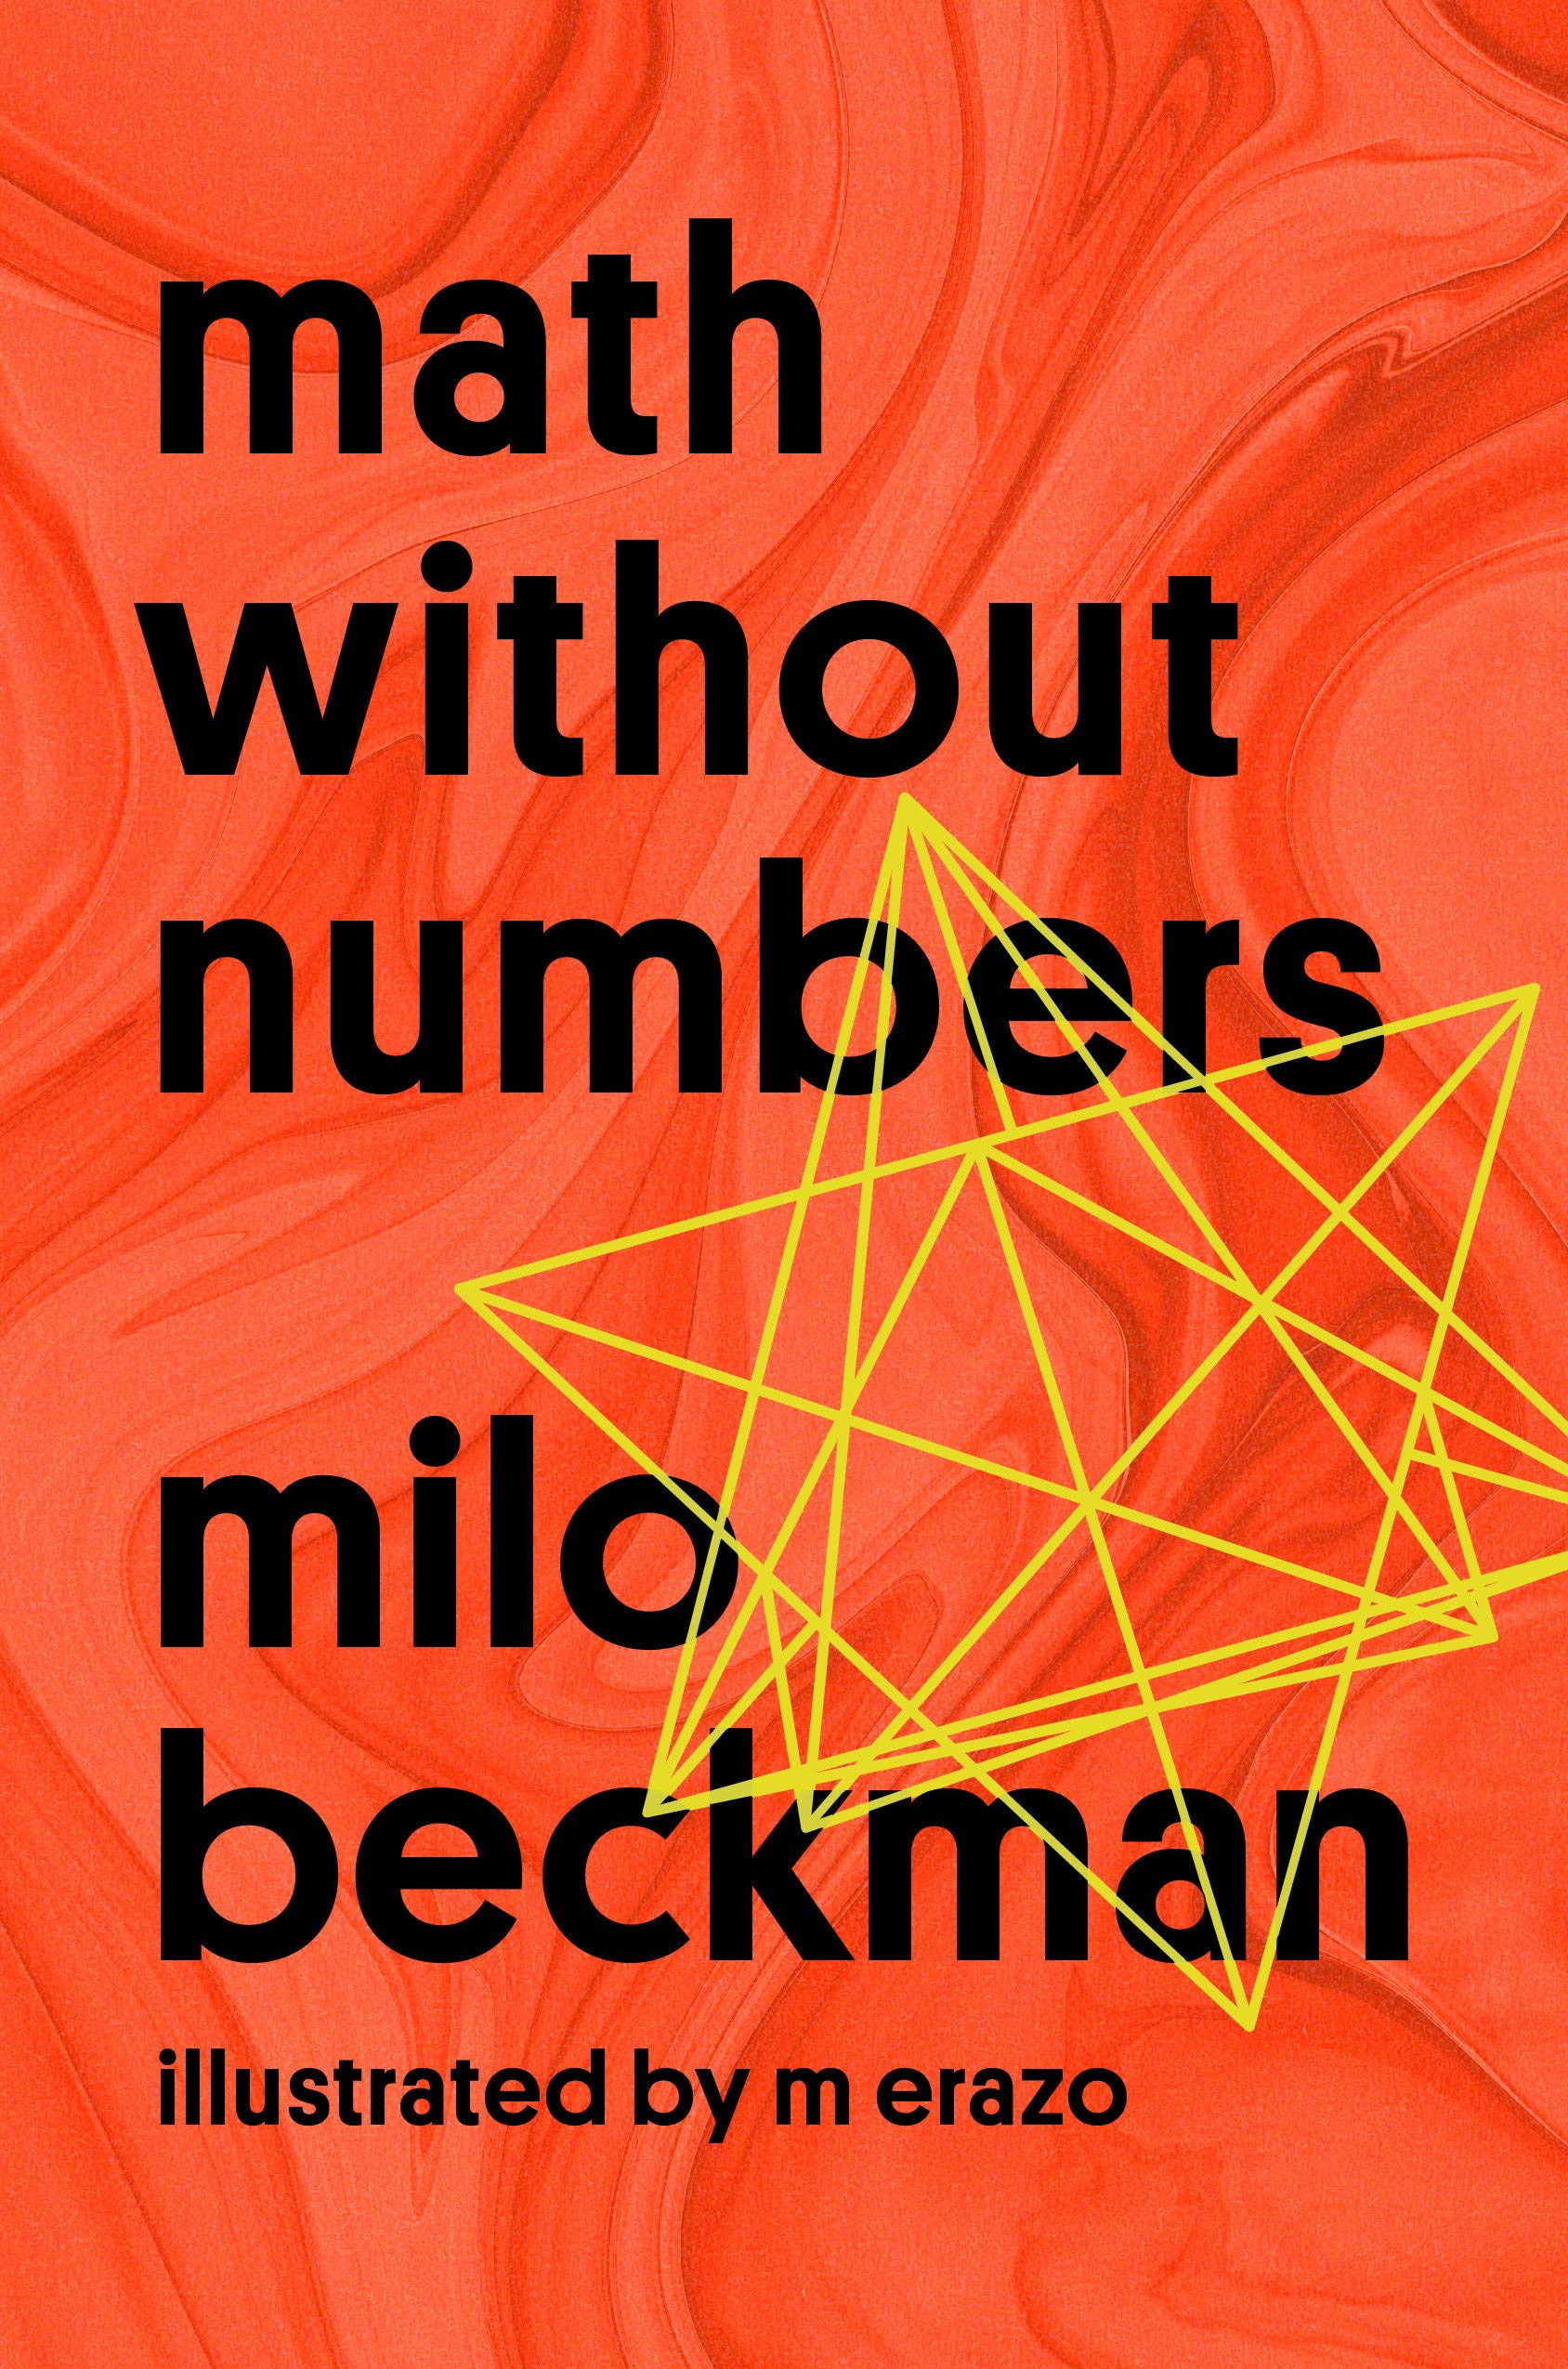 Image for "Math Without Numbers"